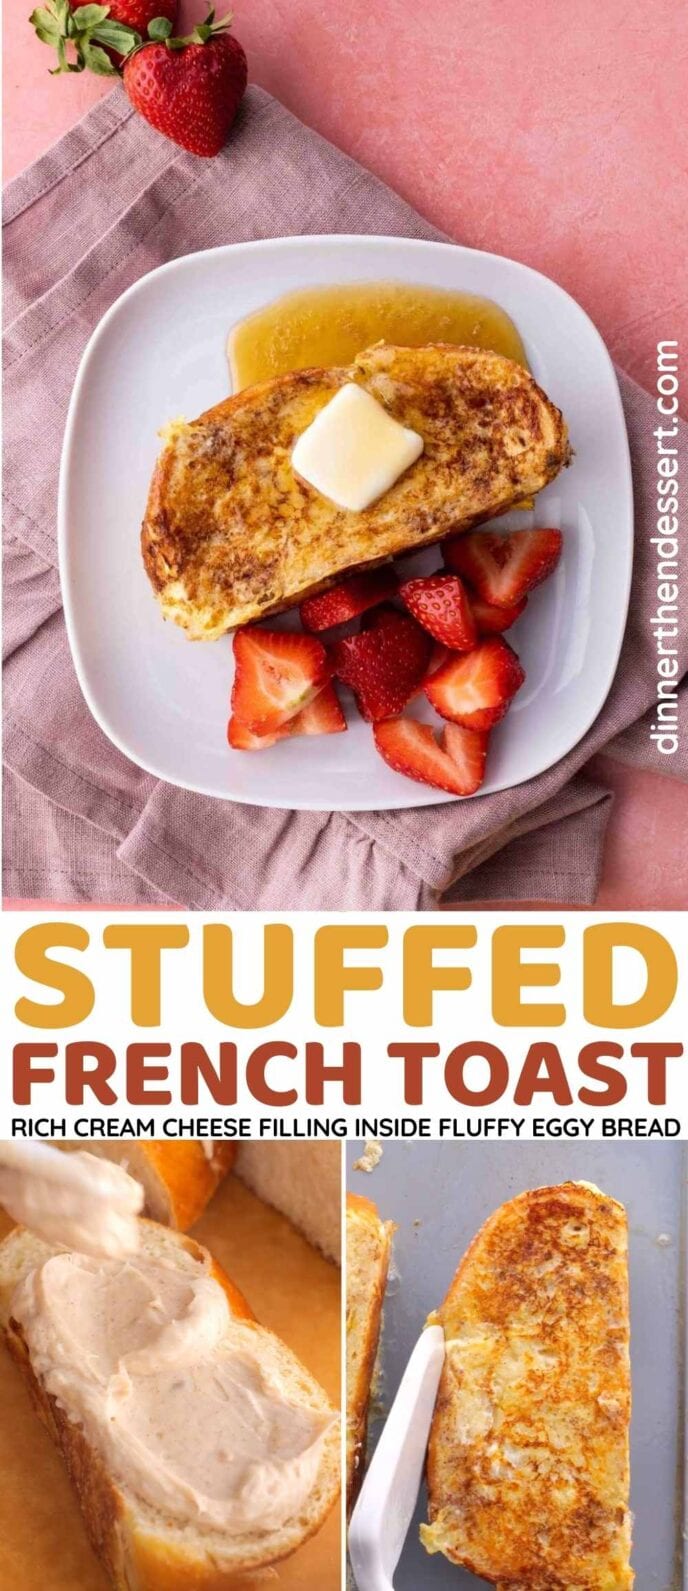 Stuffed French Toast collage